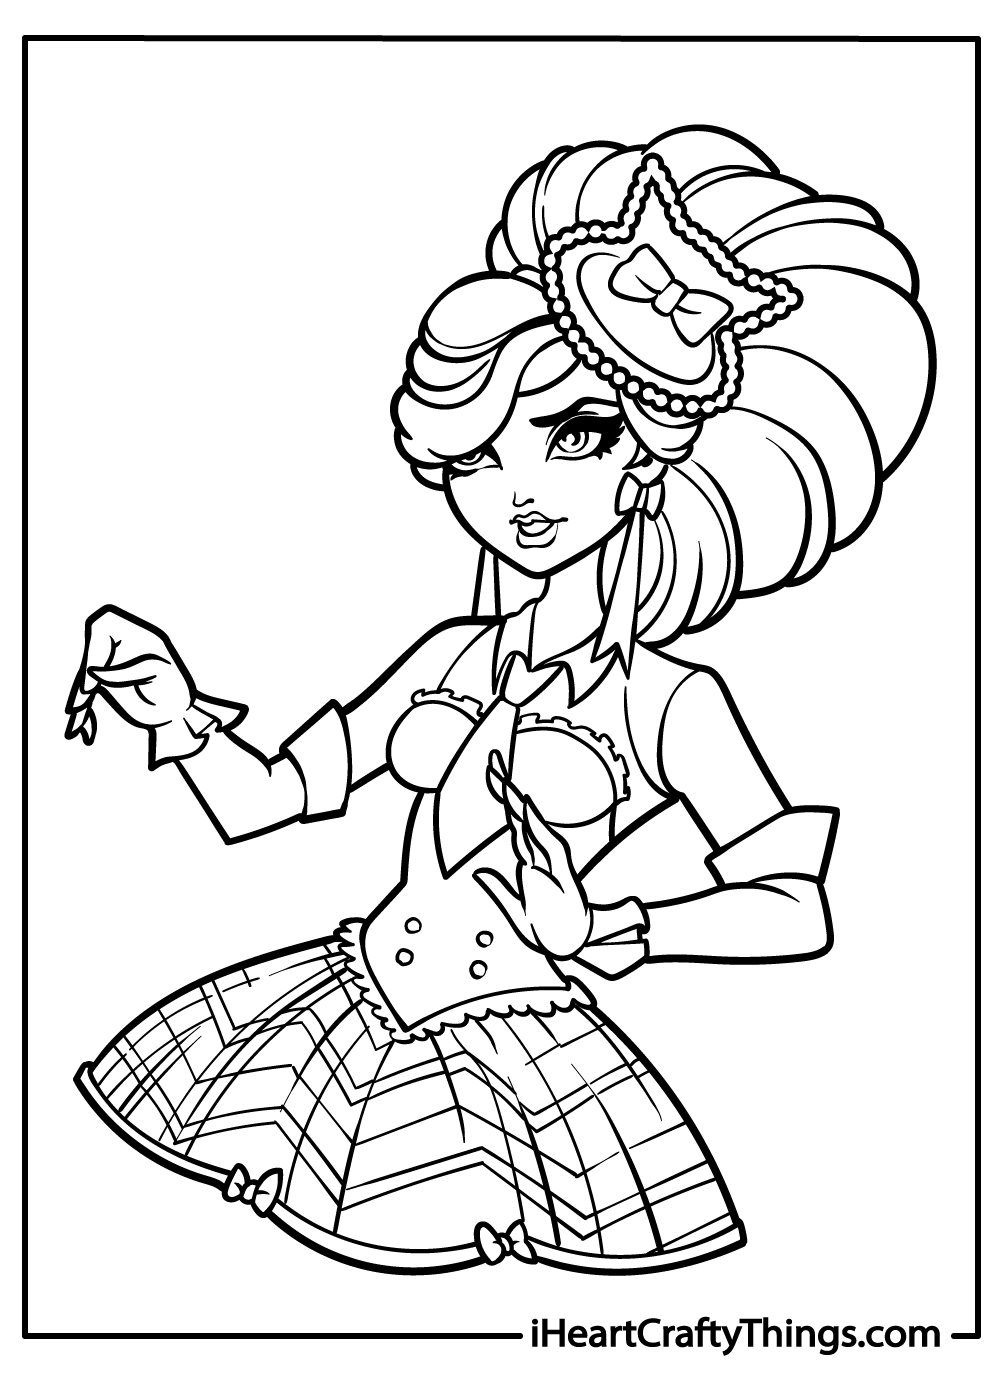 Lizzie Hearts Ever After High Coloring Printable